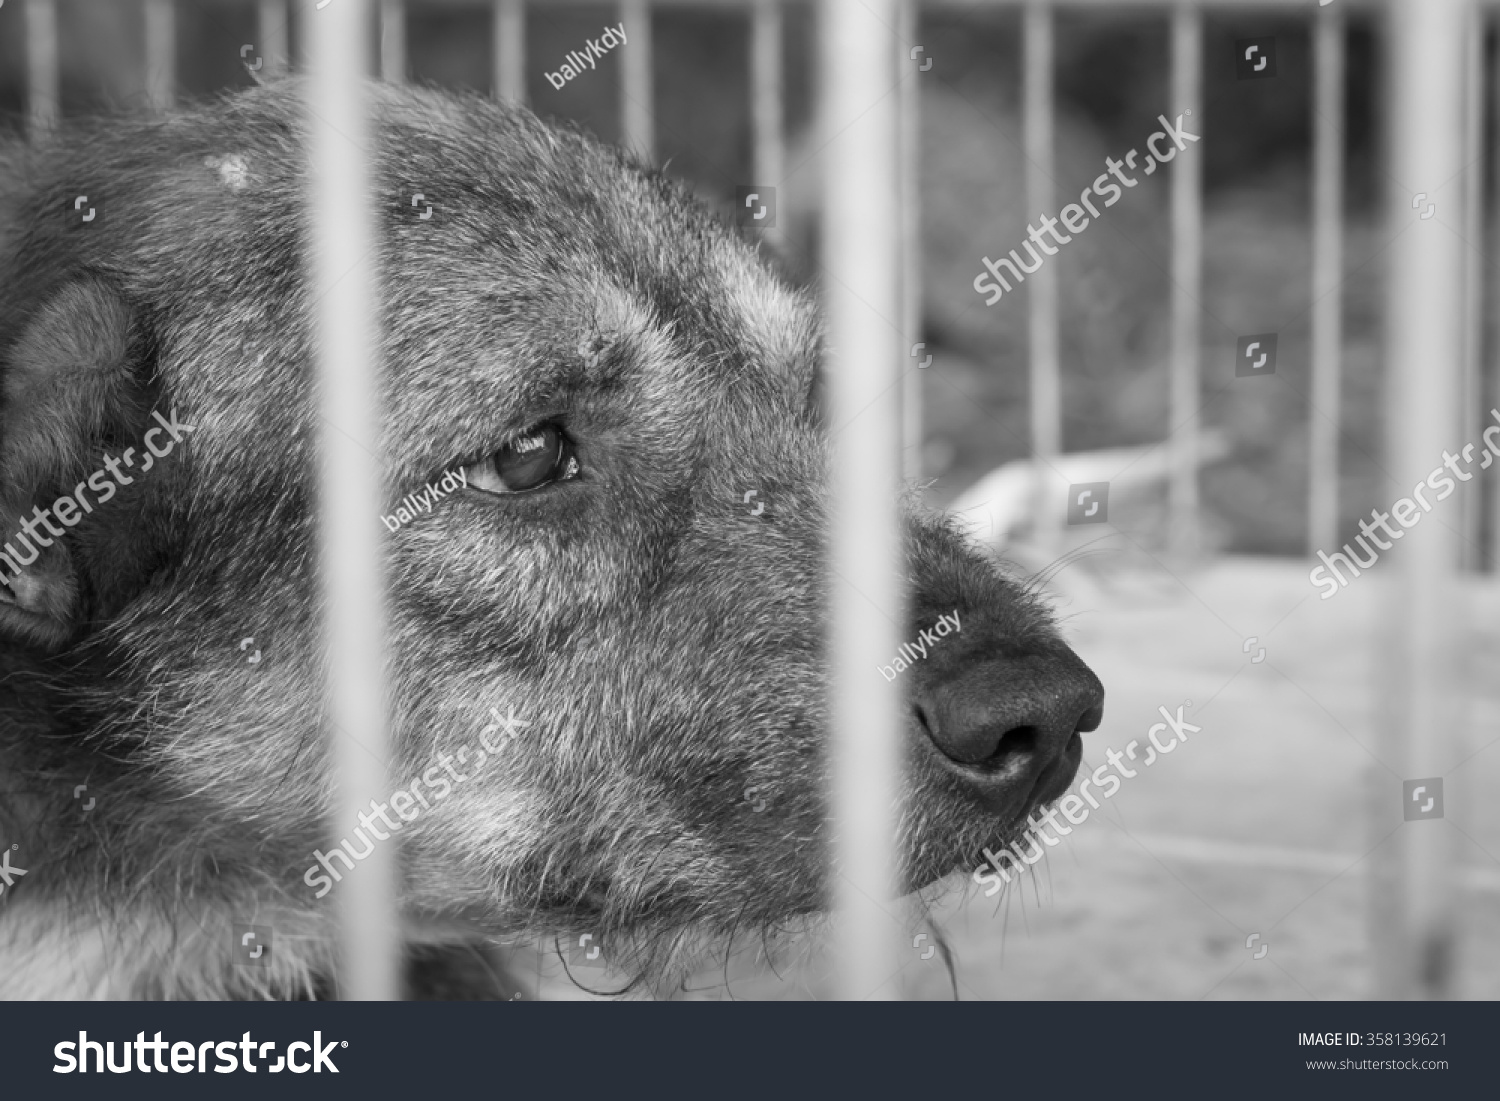 Pity Old Dog Imprison In Steel Cage, Black And White Color Stock Photo ...